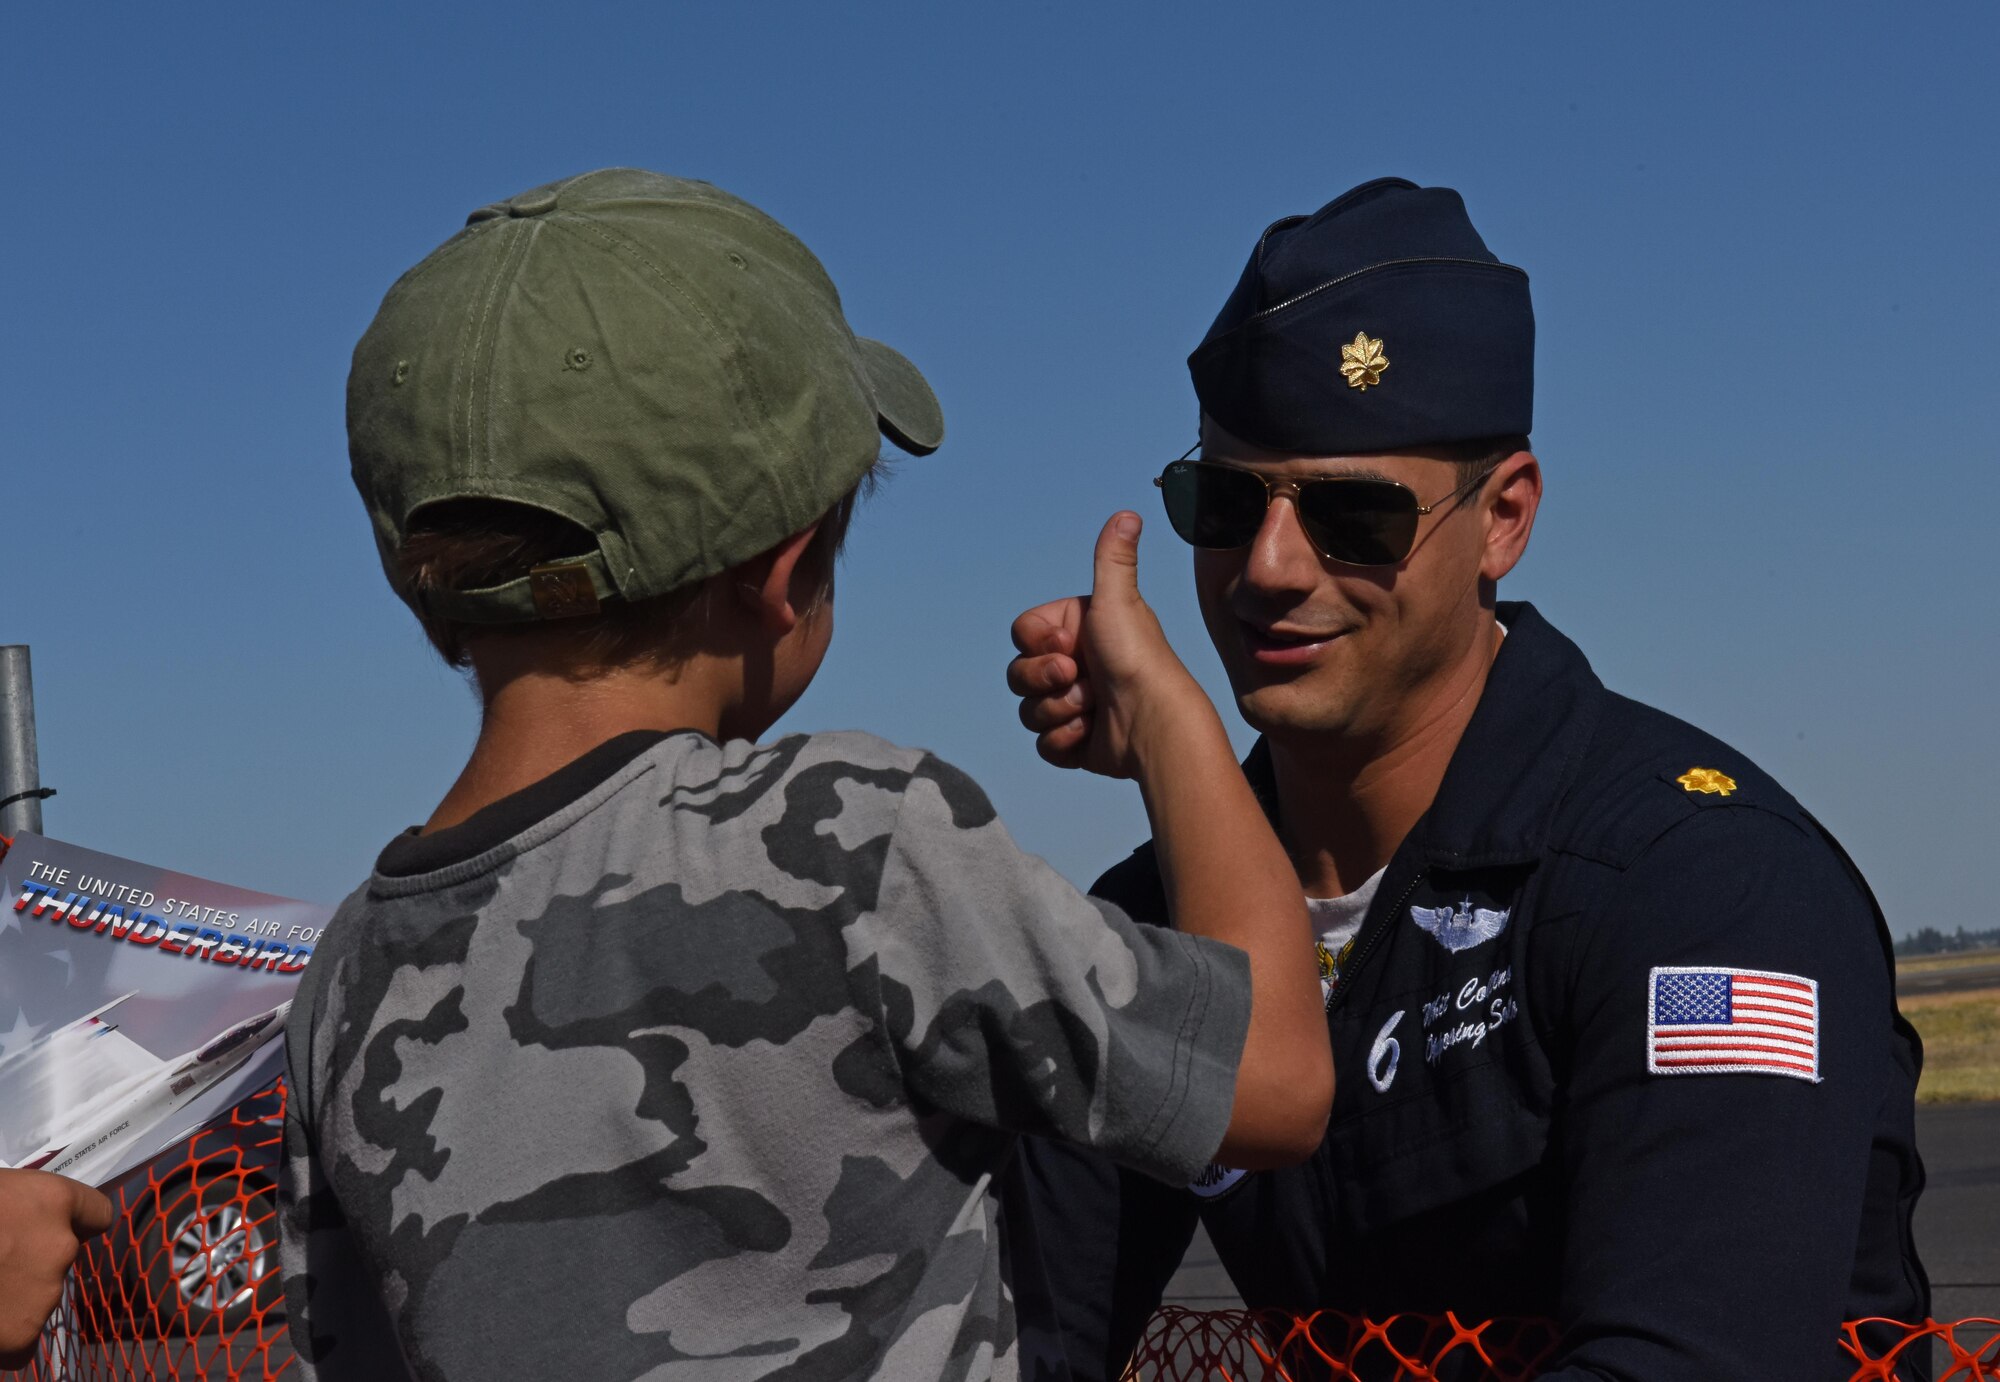 Maj. Whit Collins, solo pilot for the U.S. Air Force Thunderbirds, talks to air show guests during the 2017 Skyfest Air Show and Open House July 29, 2017, at Fairchild Air Force Base, Washington. Skyfest gives the local and regional community the opportunity to view Airmen and Air Force resources. This is Collins’ first season with the team, flying jet number six. (U.S. Air Force photo/Airman 1st Class Jesenia Landaverde)